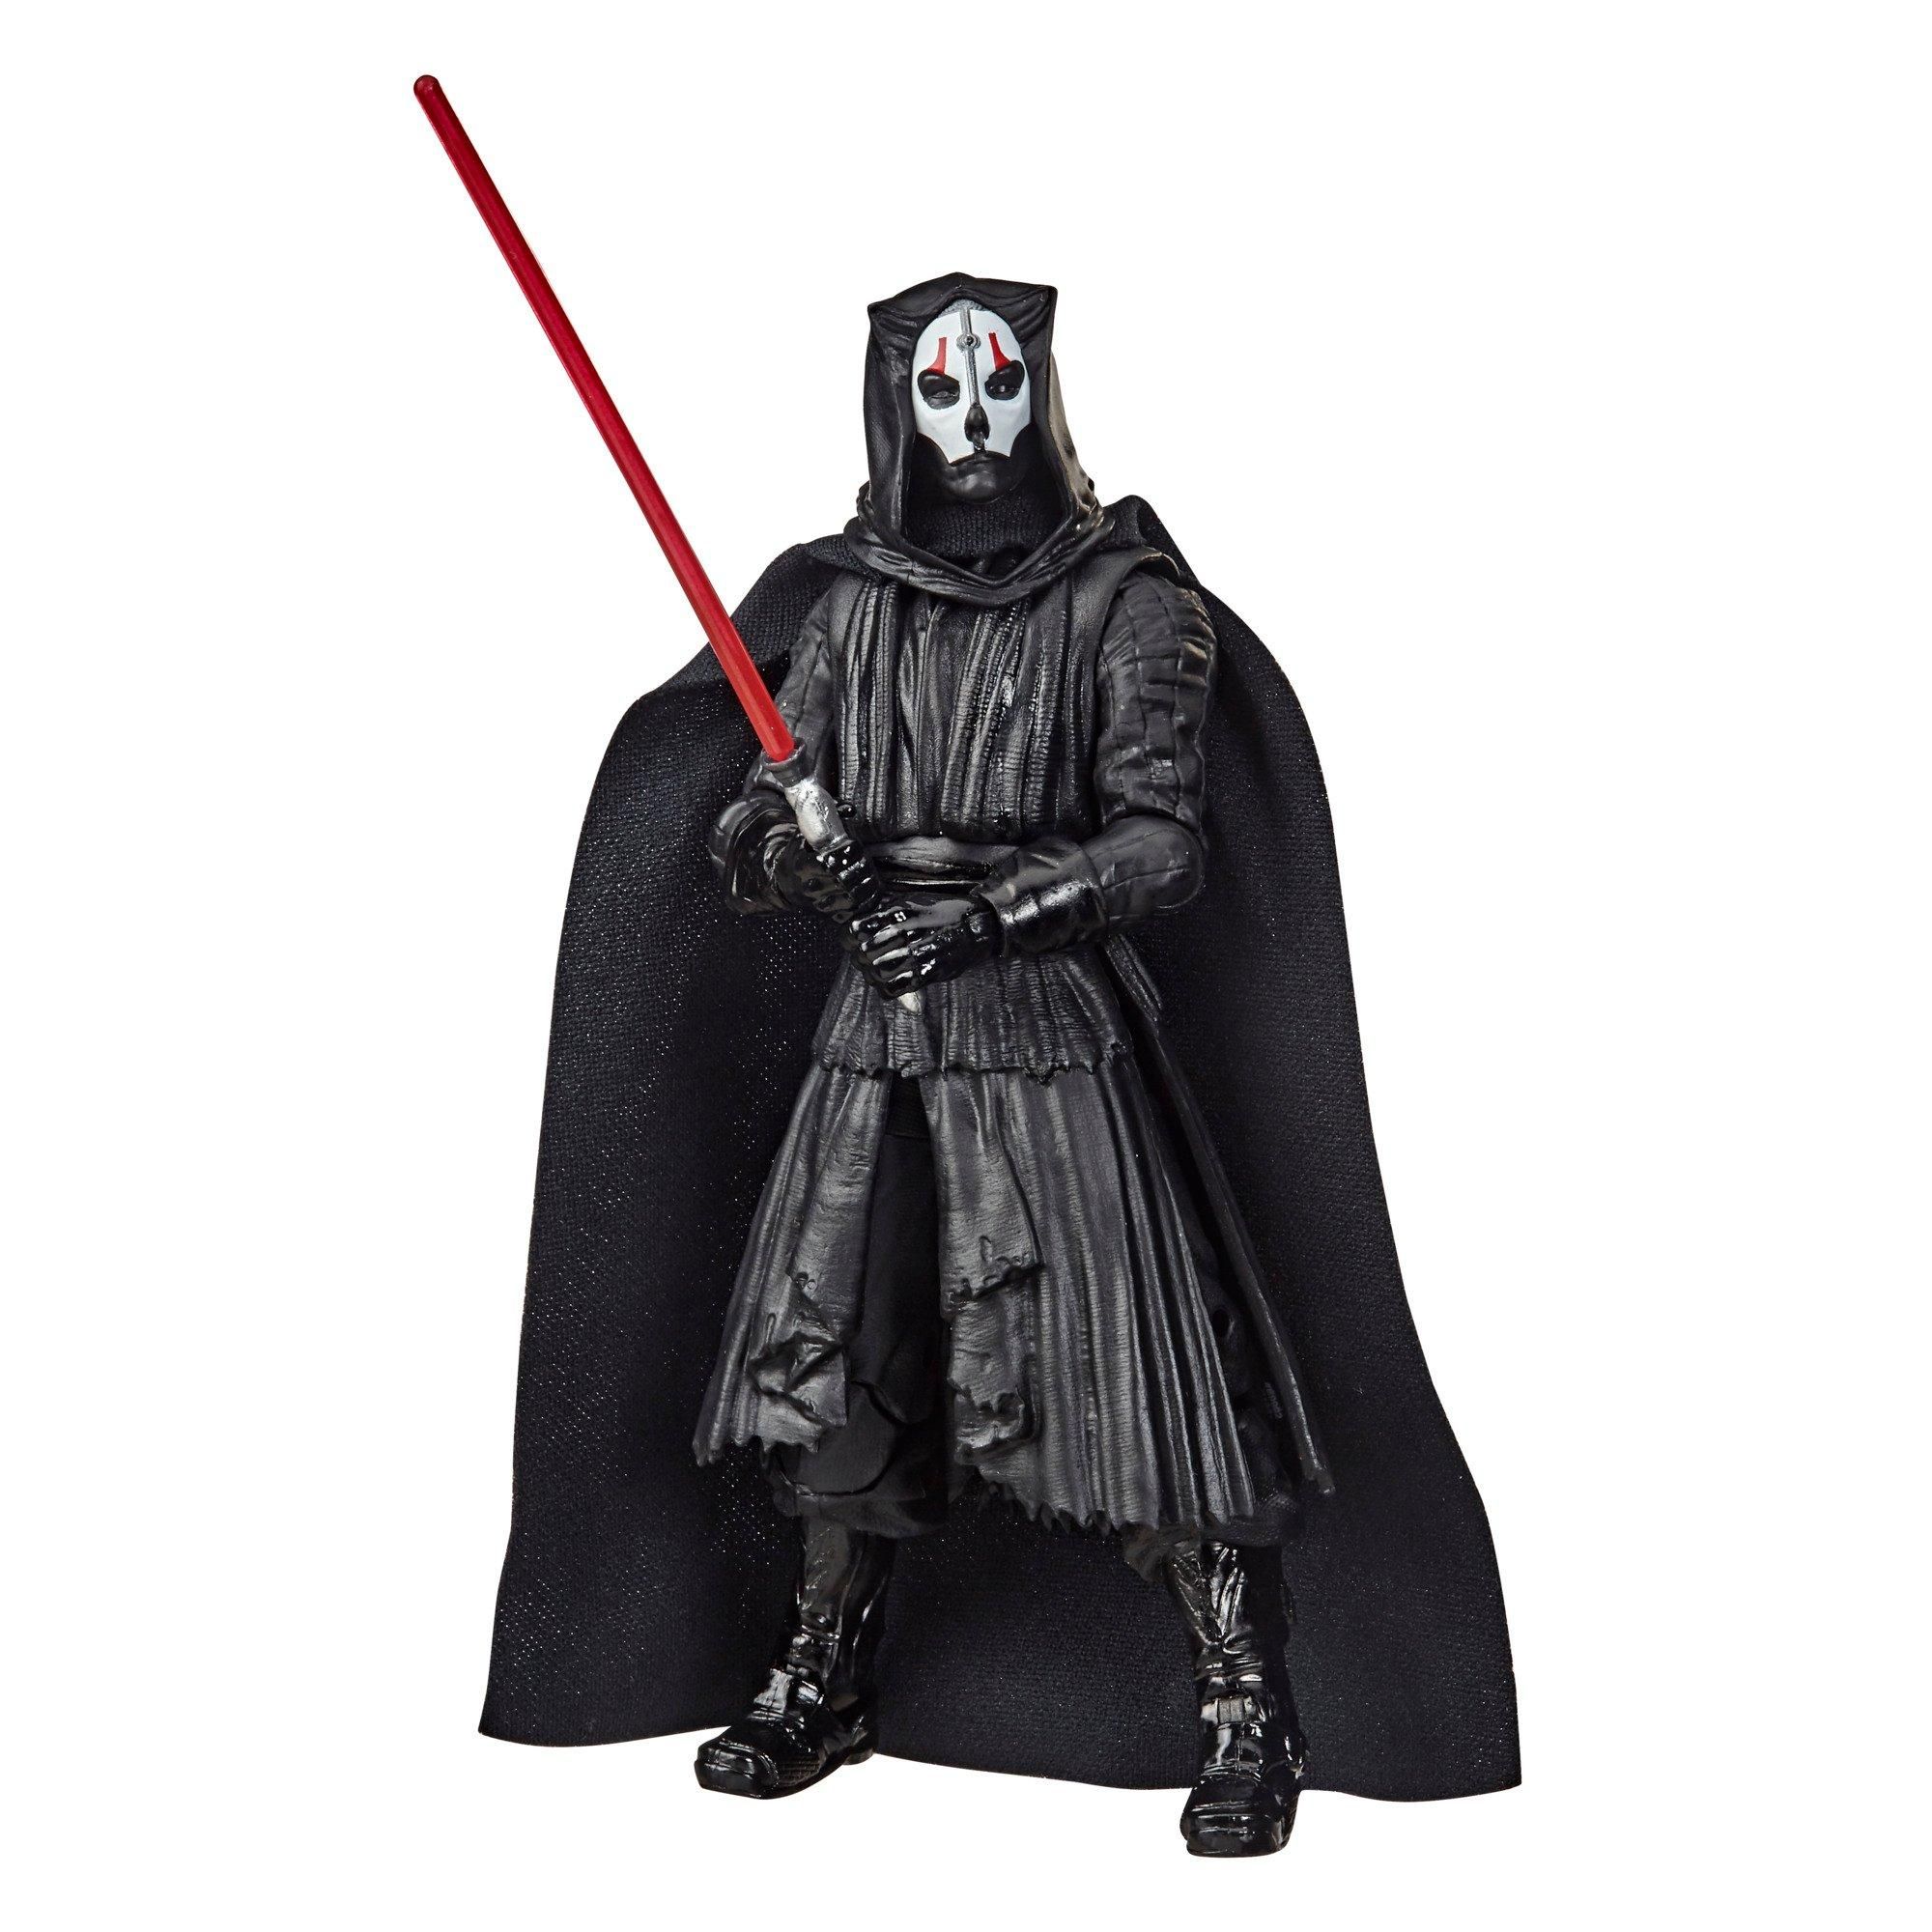 Hashbro Star Wars Black Series Darth Nihilus 6 inch Action Figure for sale online